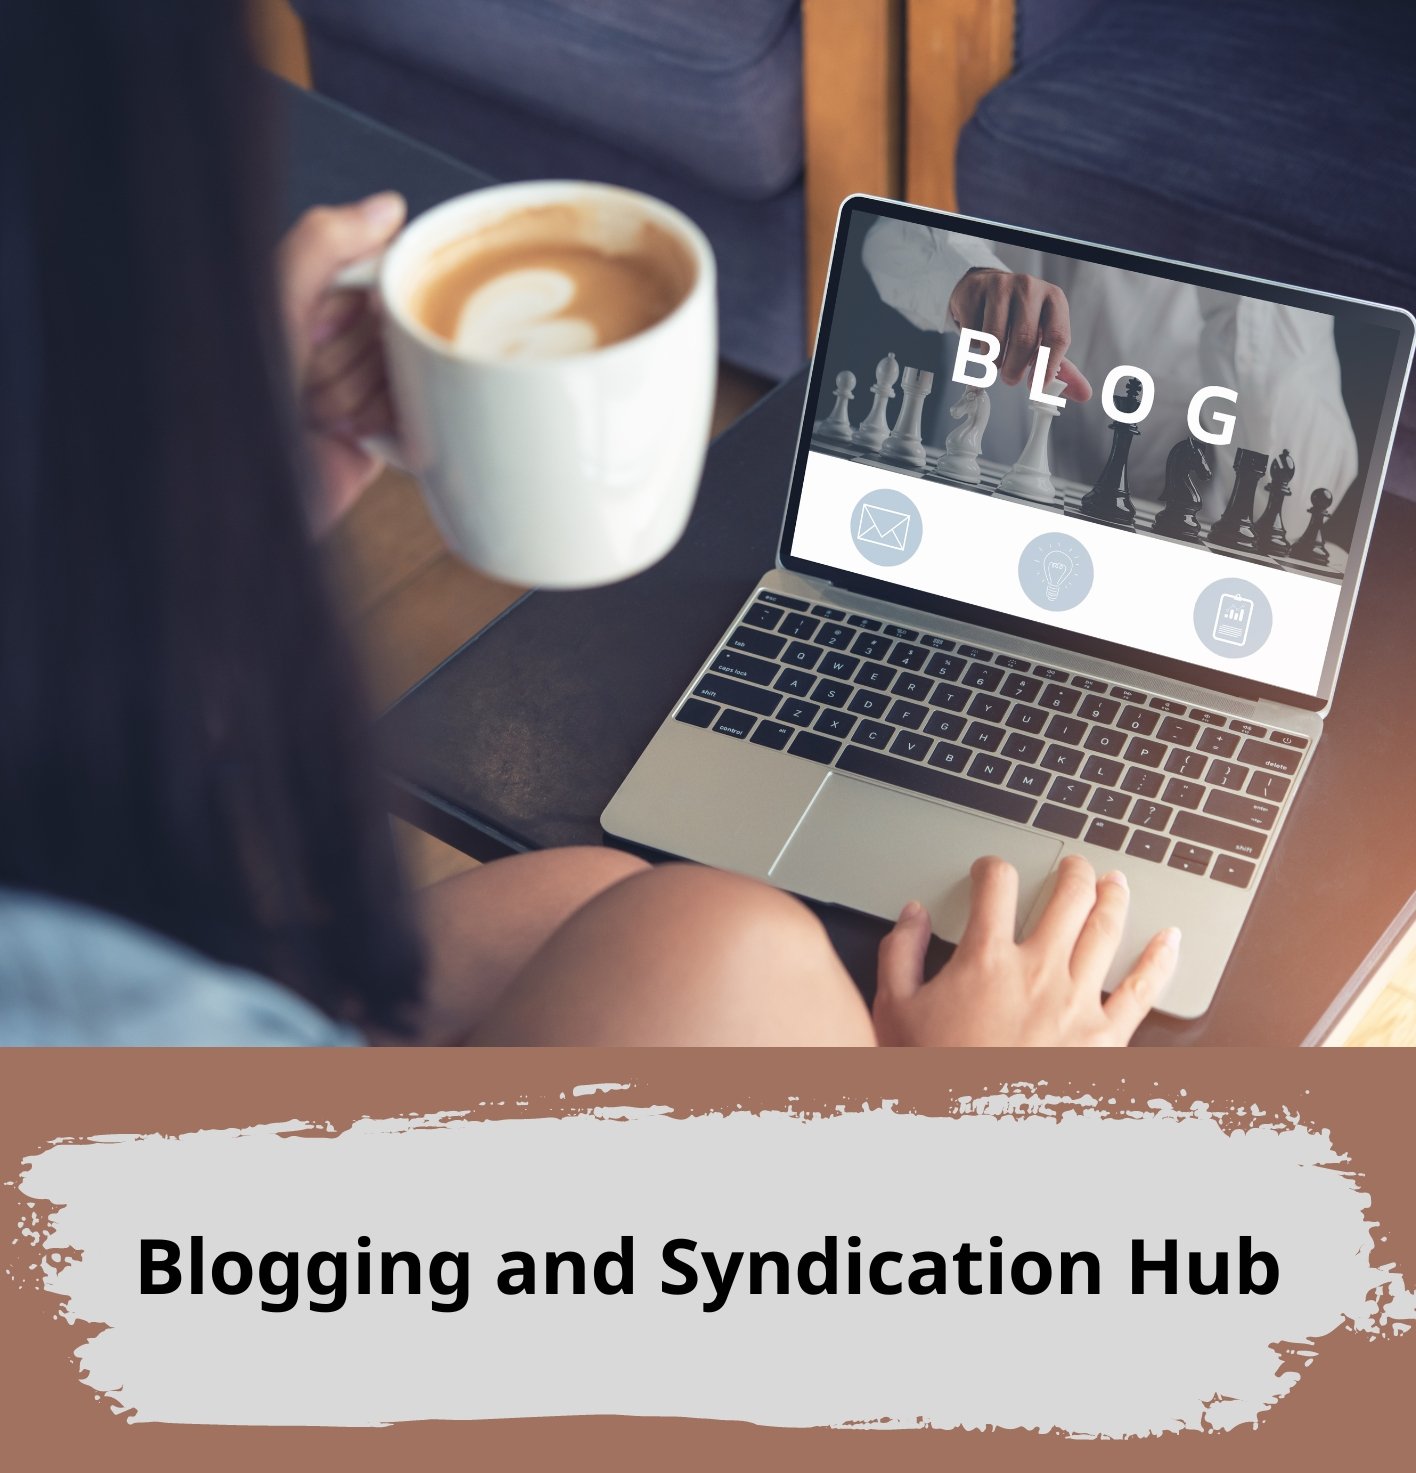 Blogging and Syndication Hub